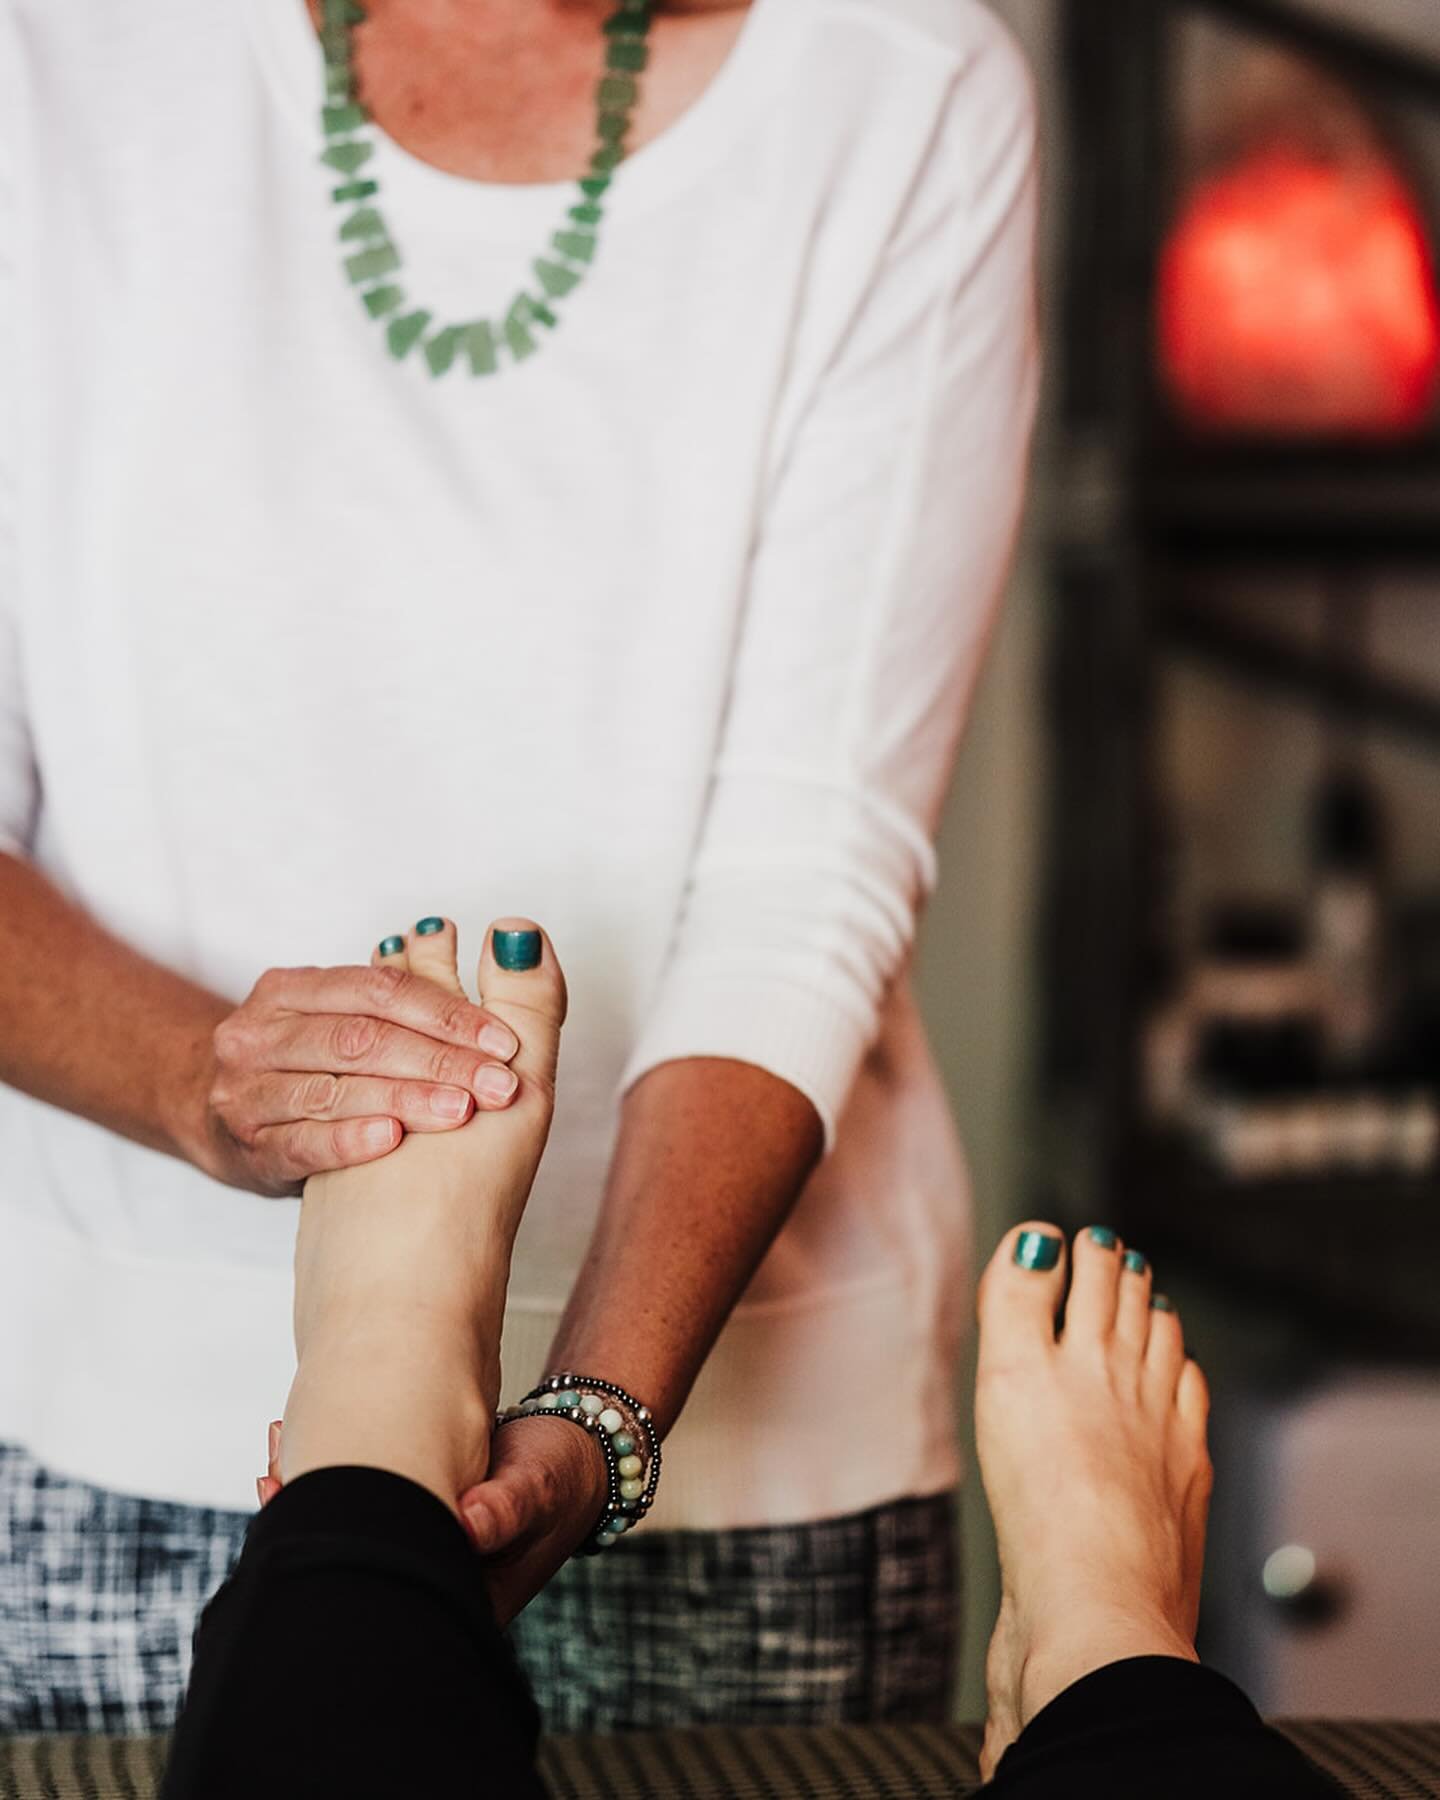 WHAT IS REFLEXOLOGY?

Reflexology is an ancient holistic therapy where gentle acupressure is applied to specific points on the feet and/or hands which correspond to the body organs and systems. Reflexology stimulates the body which eases stress and h